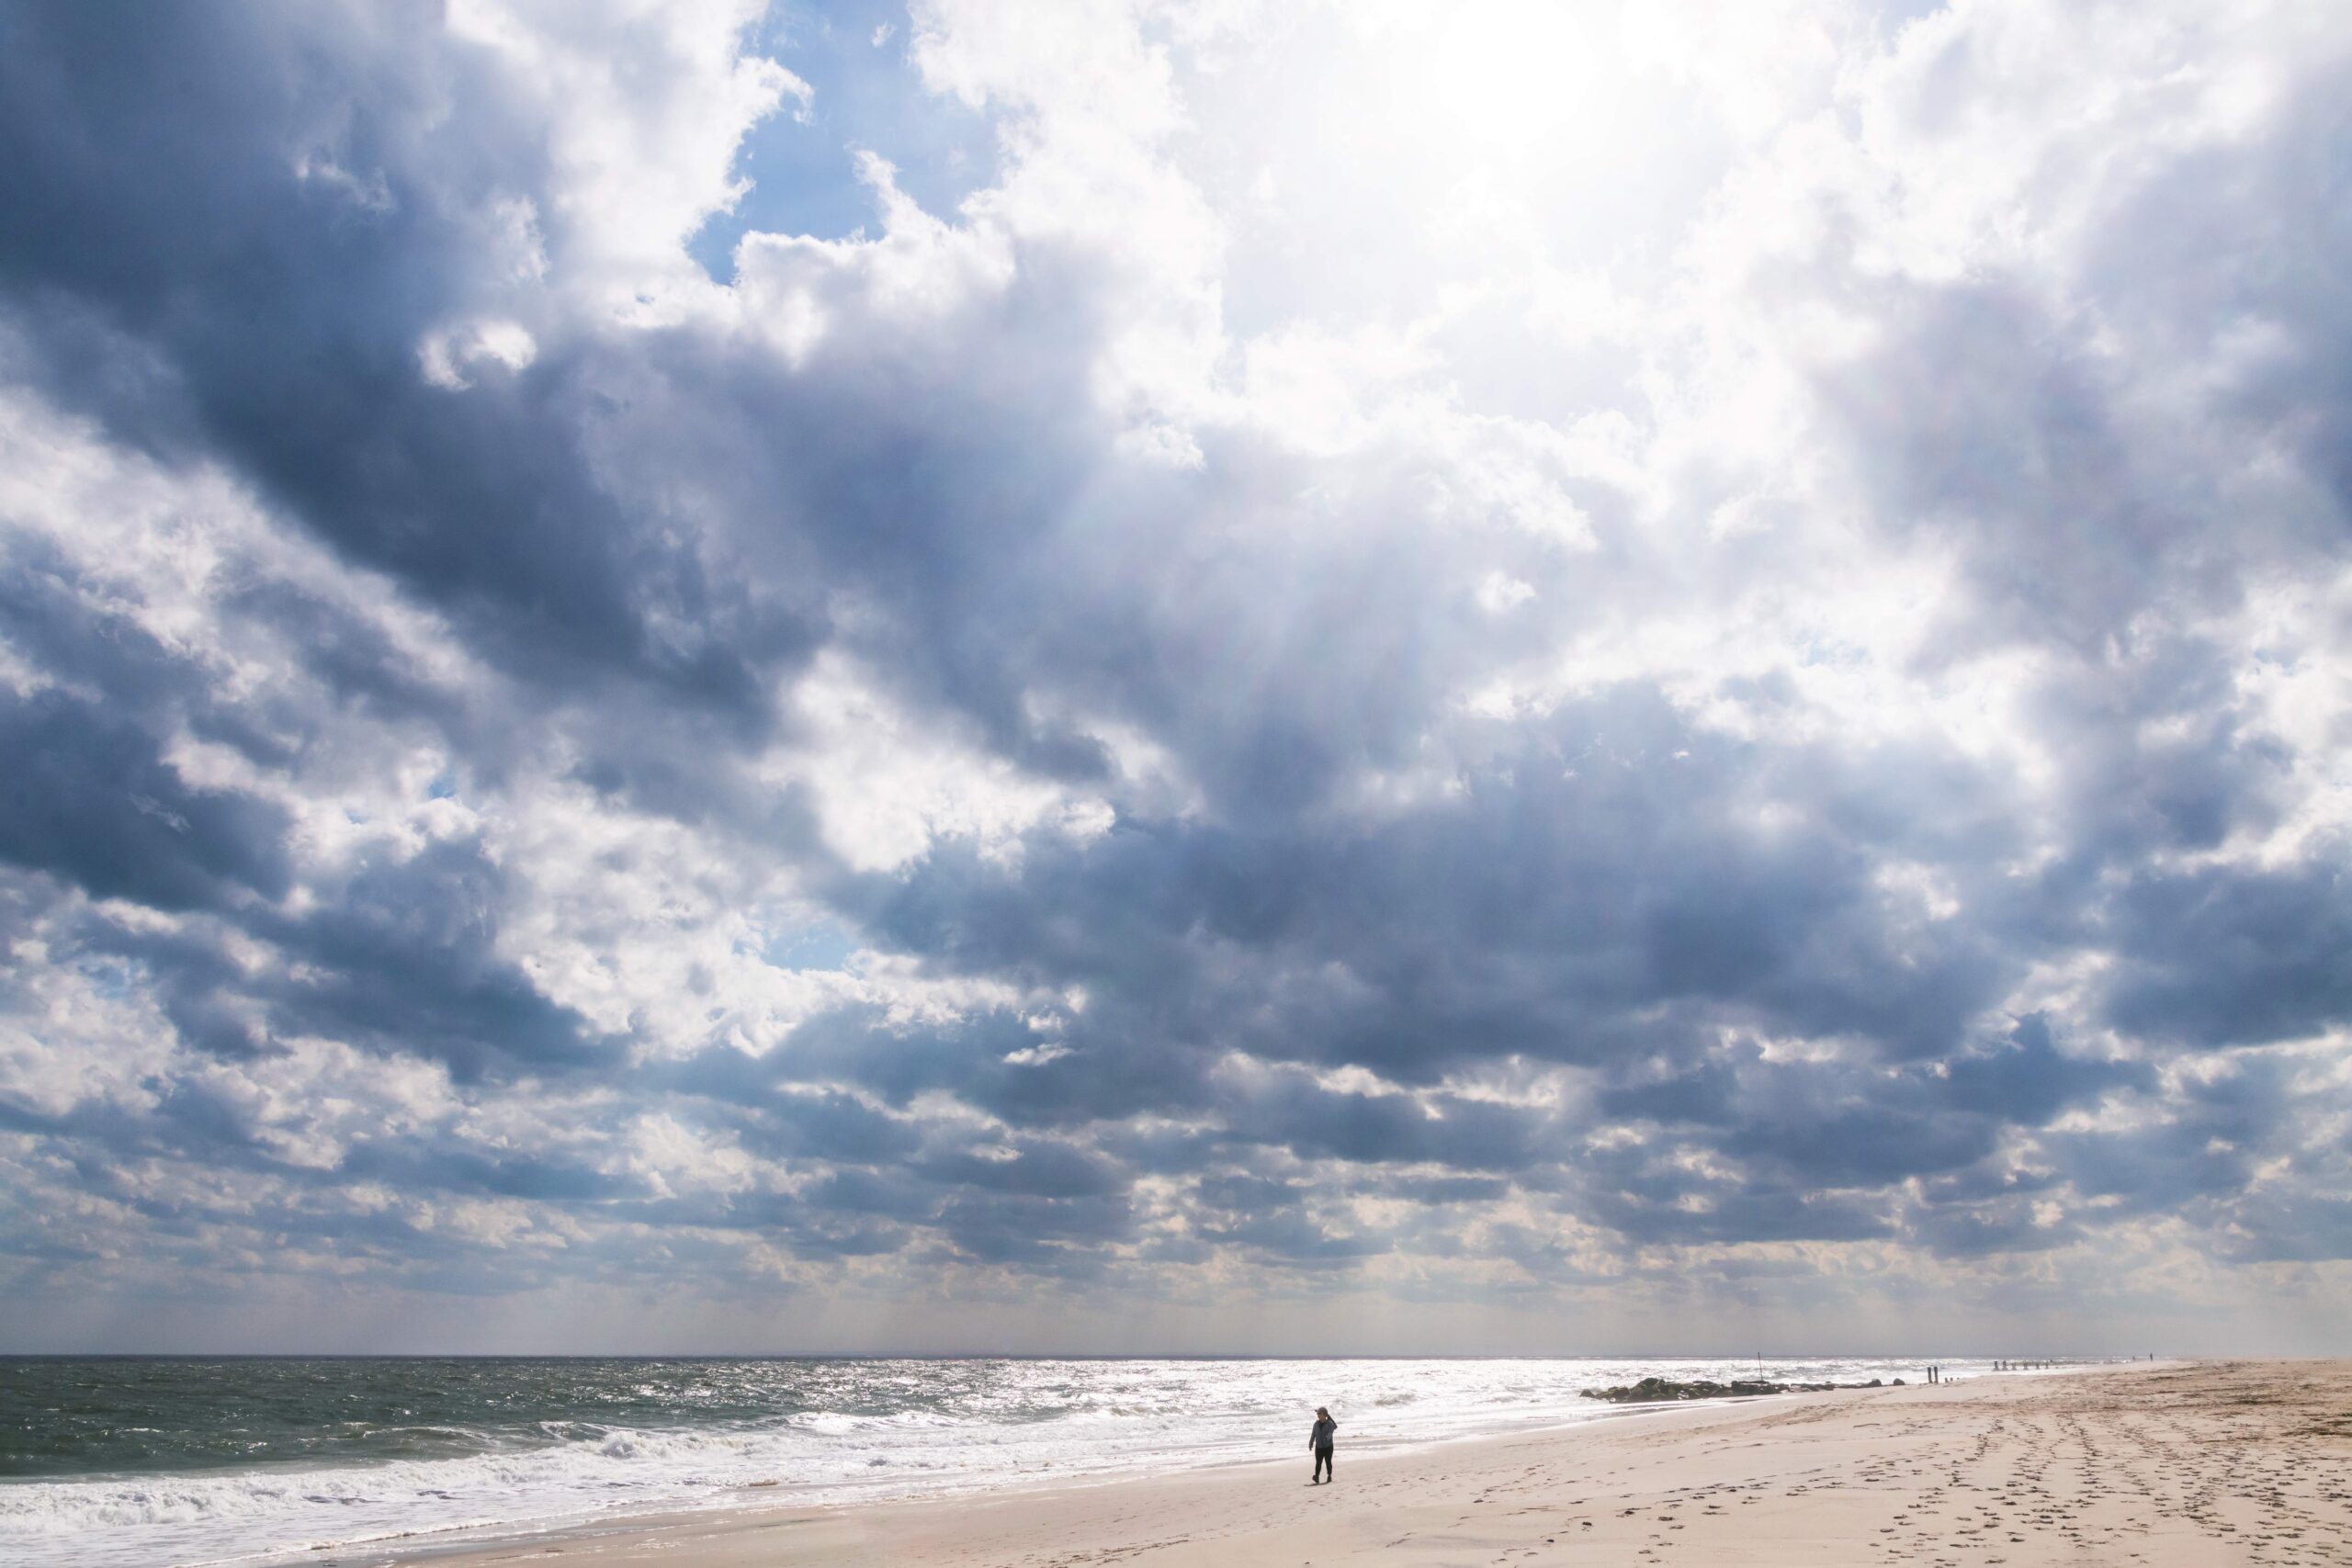 Puffy blue and gray clouds in the sky with sun breaking through and someone walking in the distance on the beach